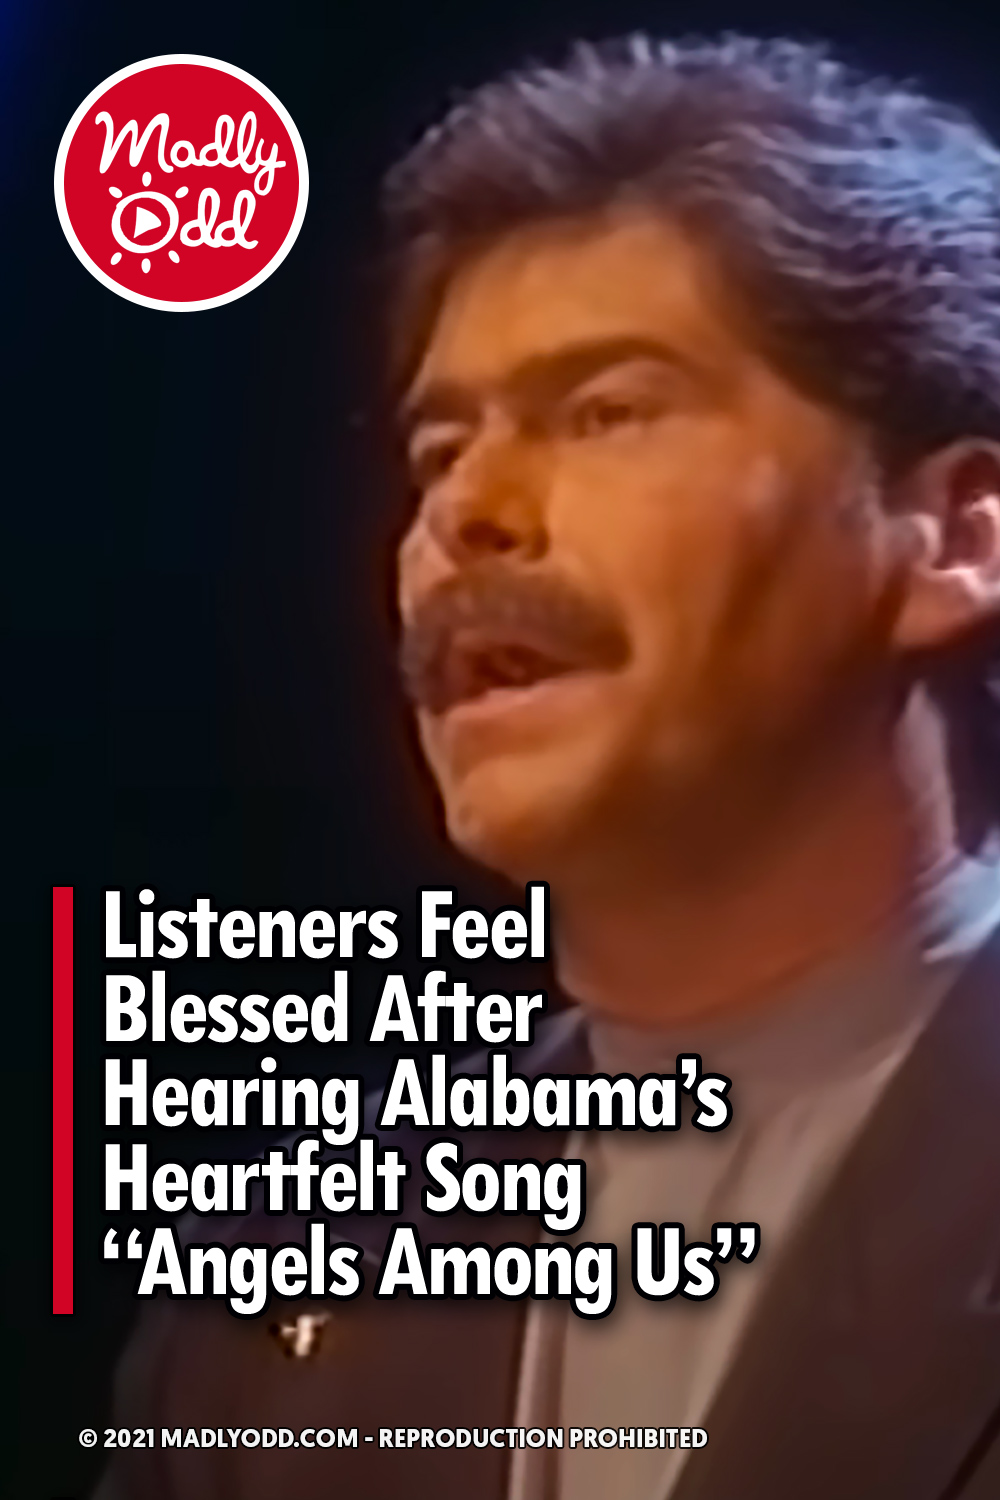 Listeners Feel Blessed After Hearing Alabama’s Heartfelt Song “Angels Among Us”